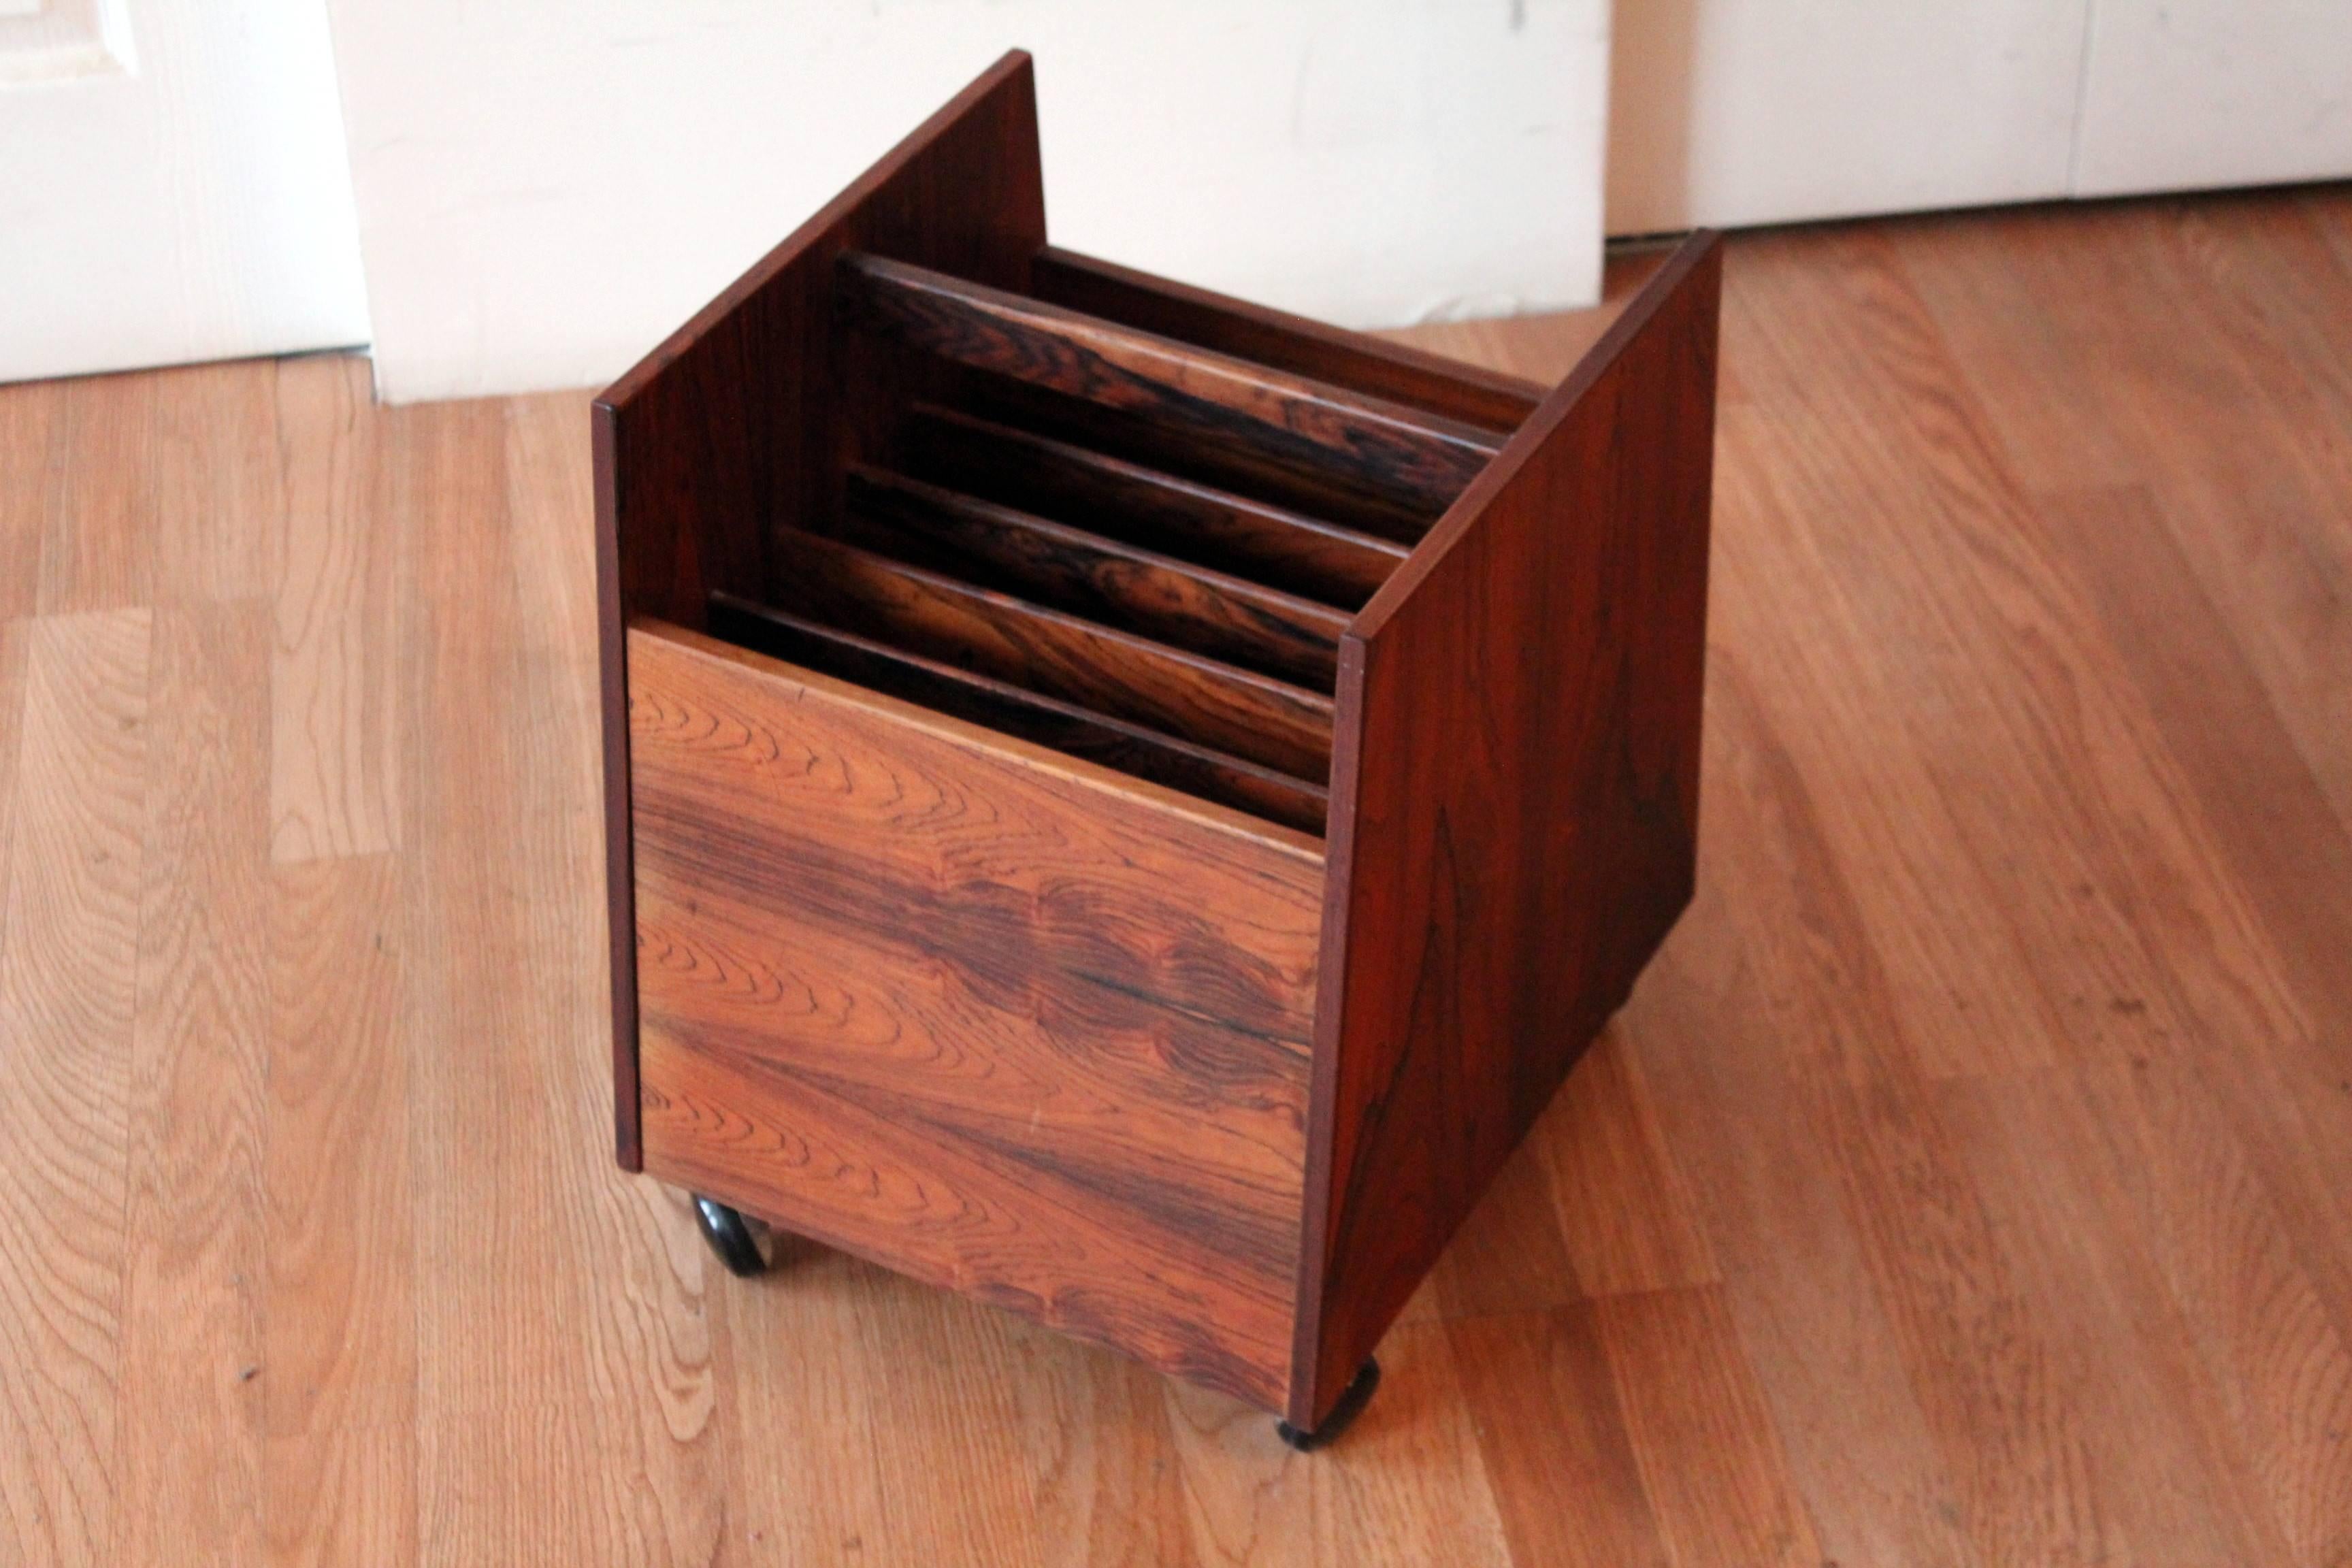 This rosewood magazine rack by Brusko, made in Norway, does double duty as a magazine rack or record storage cabinet. The piece, which features six storage compartments, rests on four smooth rolling casters and is beautifully labeled showing its